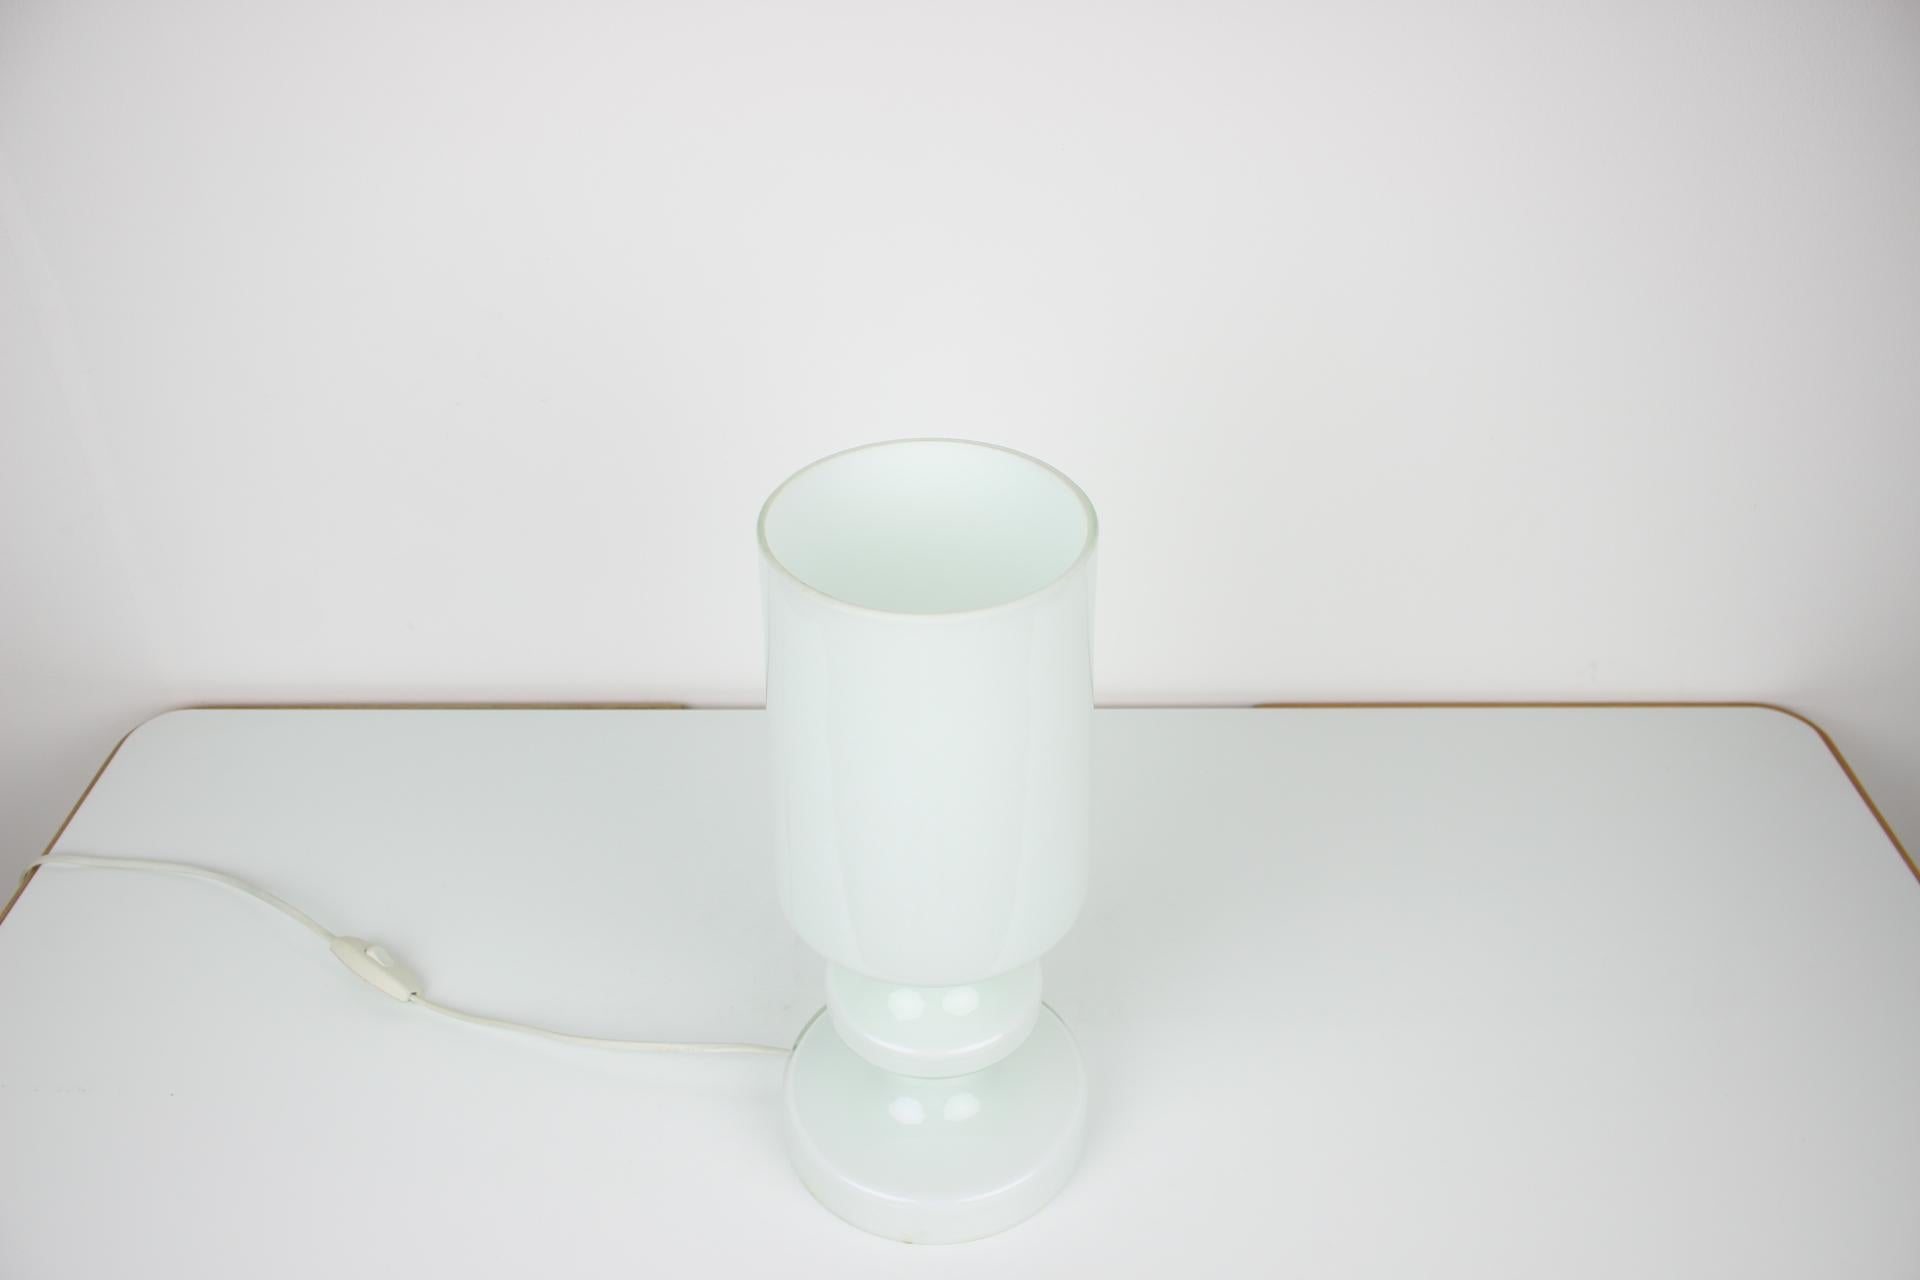 - Made in Czechoslovakia
- Made of opaline glass
- Re-polished
- Fully functional
- Very Good, original condition.